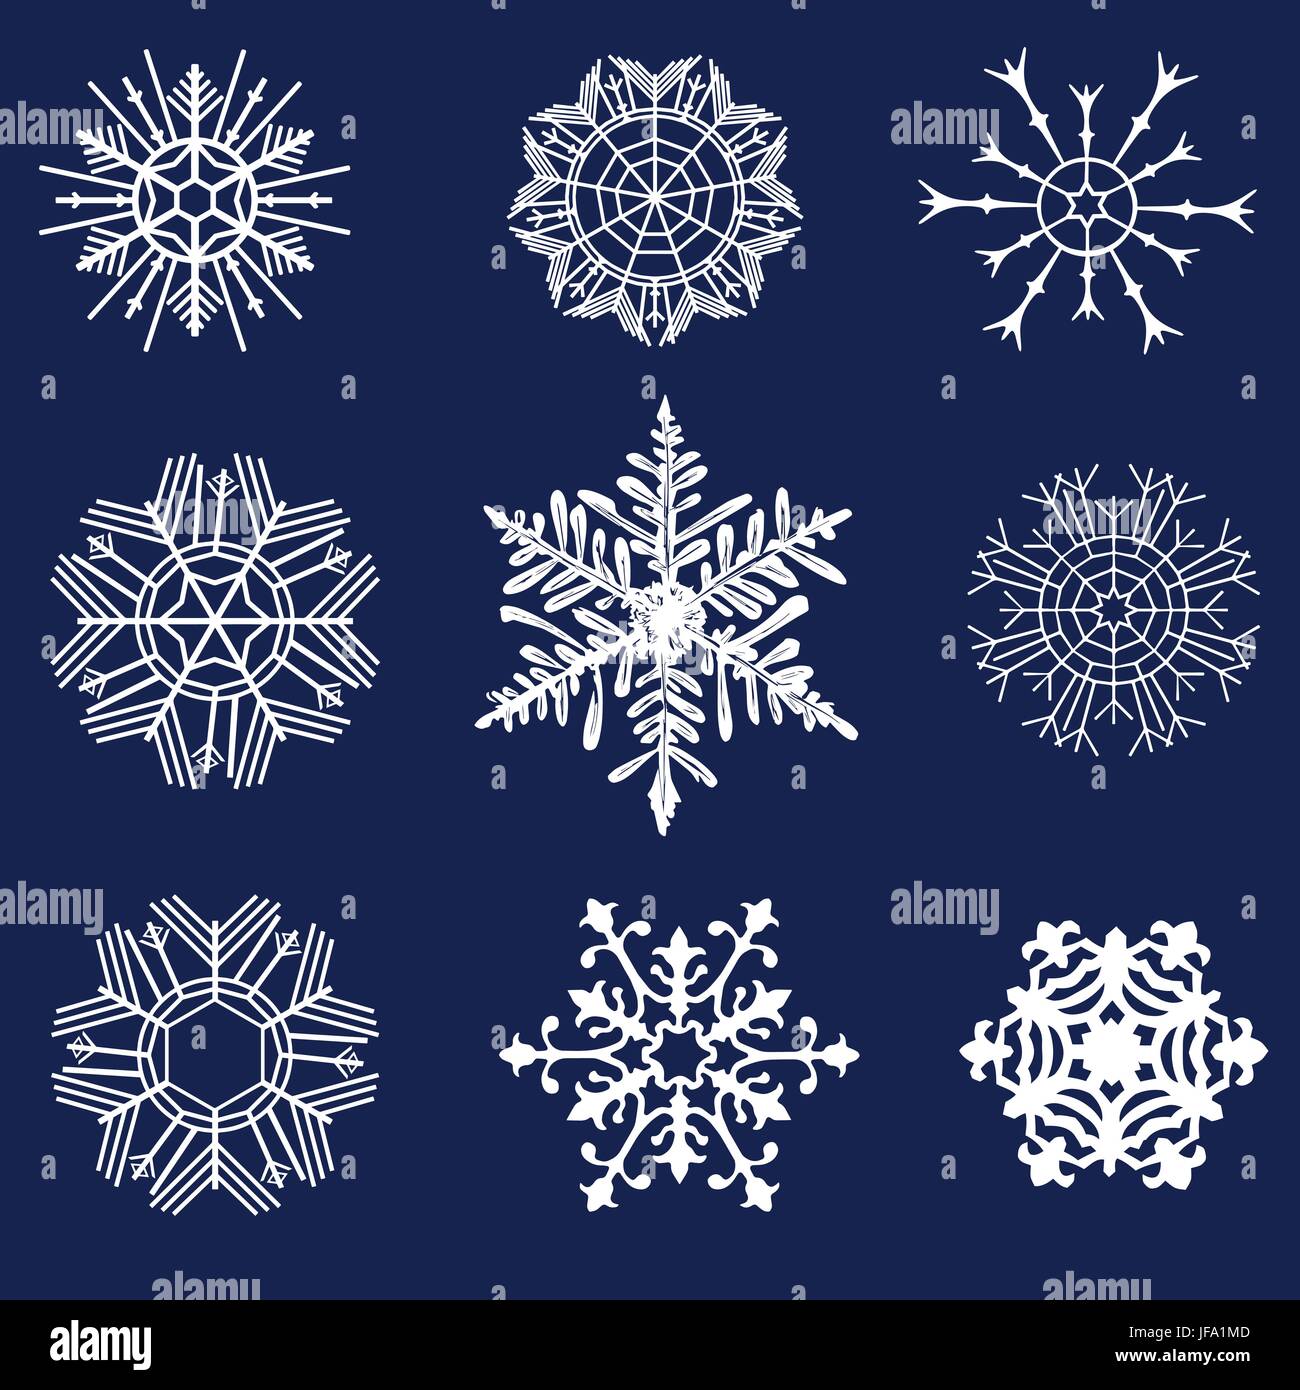 Different snowflakes set Stock Vector